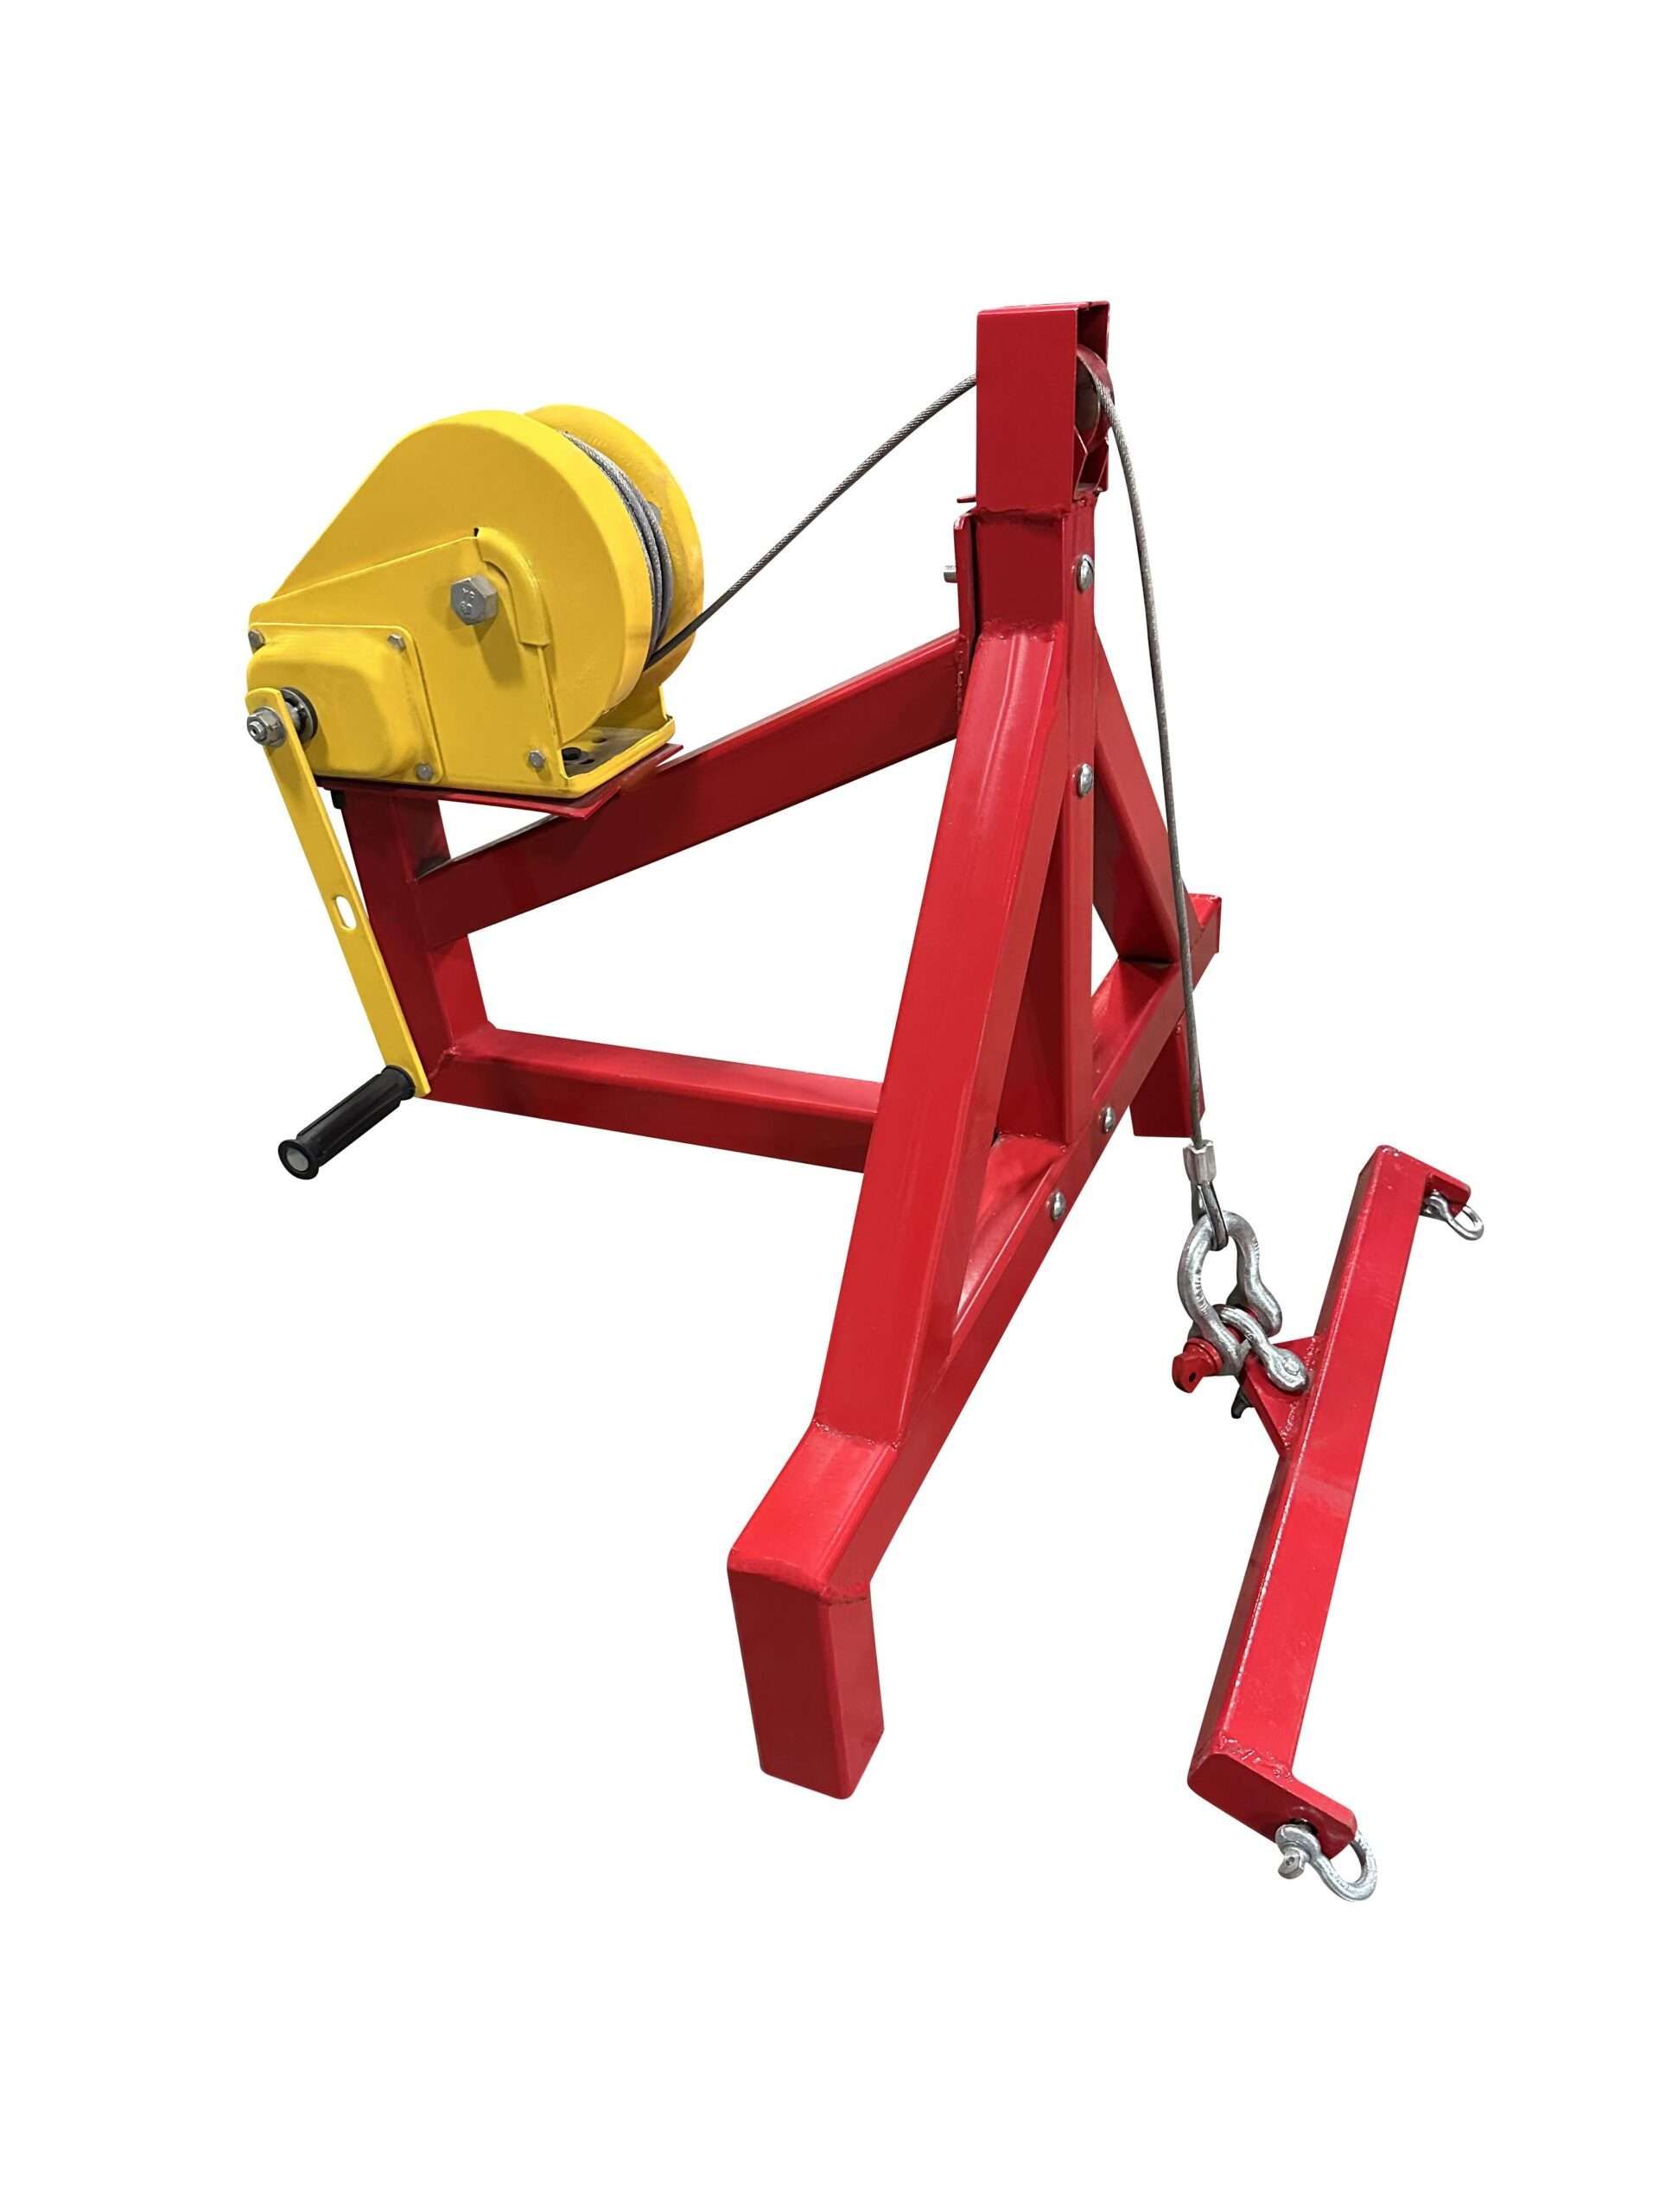 winch,pulley,lifting device,winch system,pulley system,manual winch,electric winch,winch lifting capacity,hand winch,winch definition,hand crank winch,what is a winch